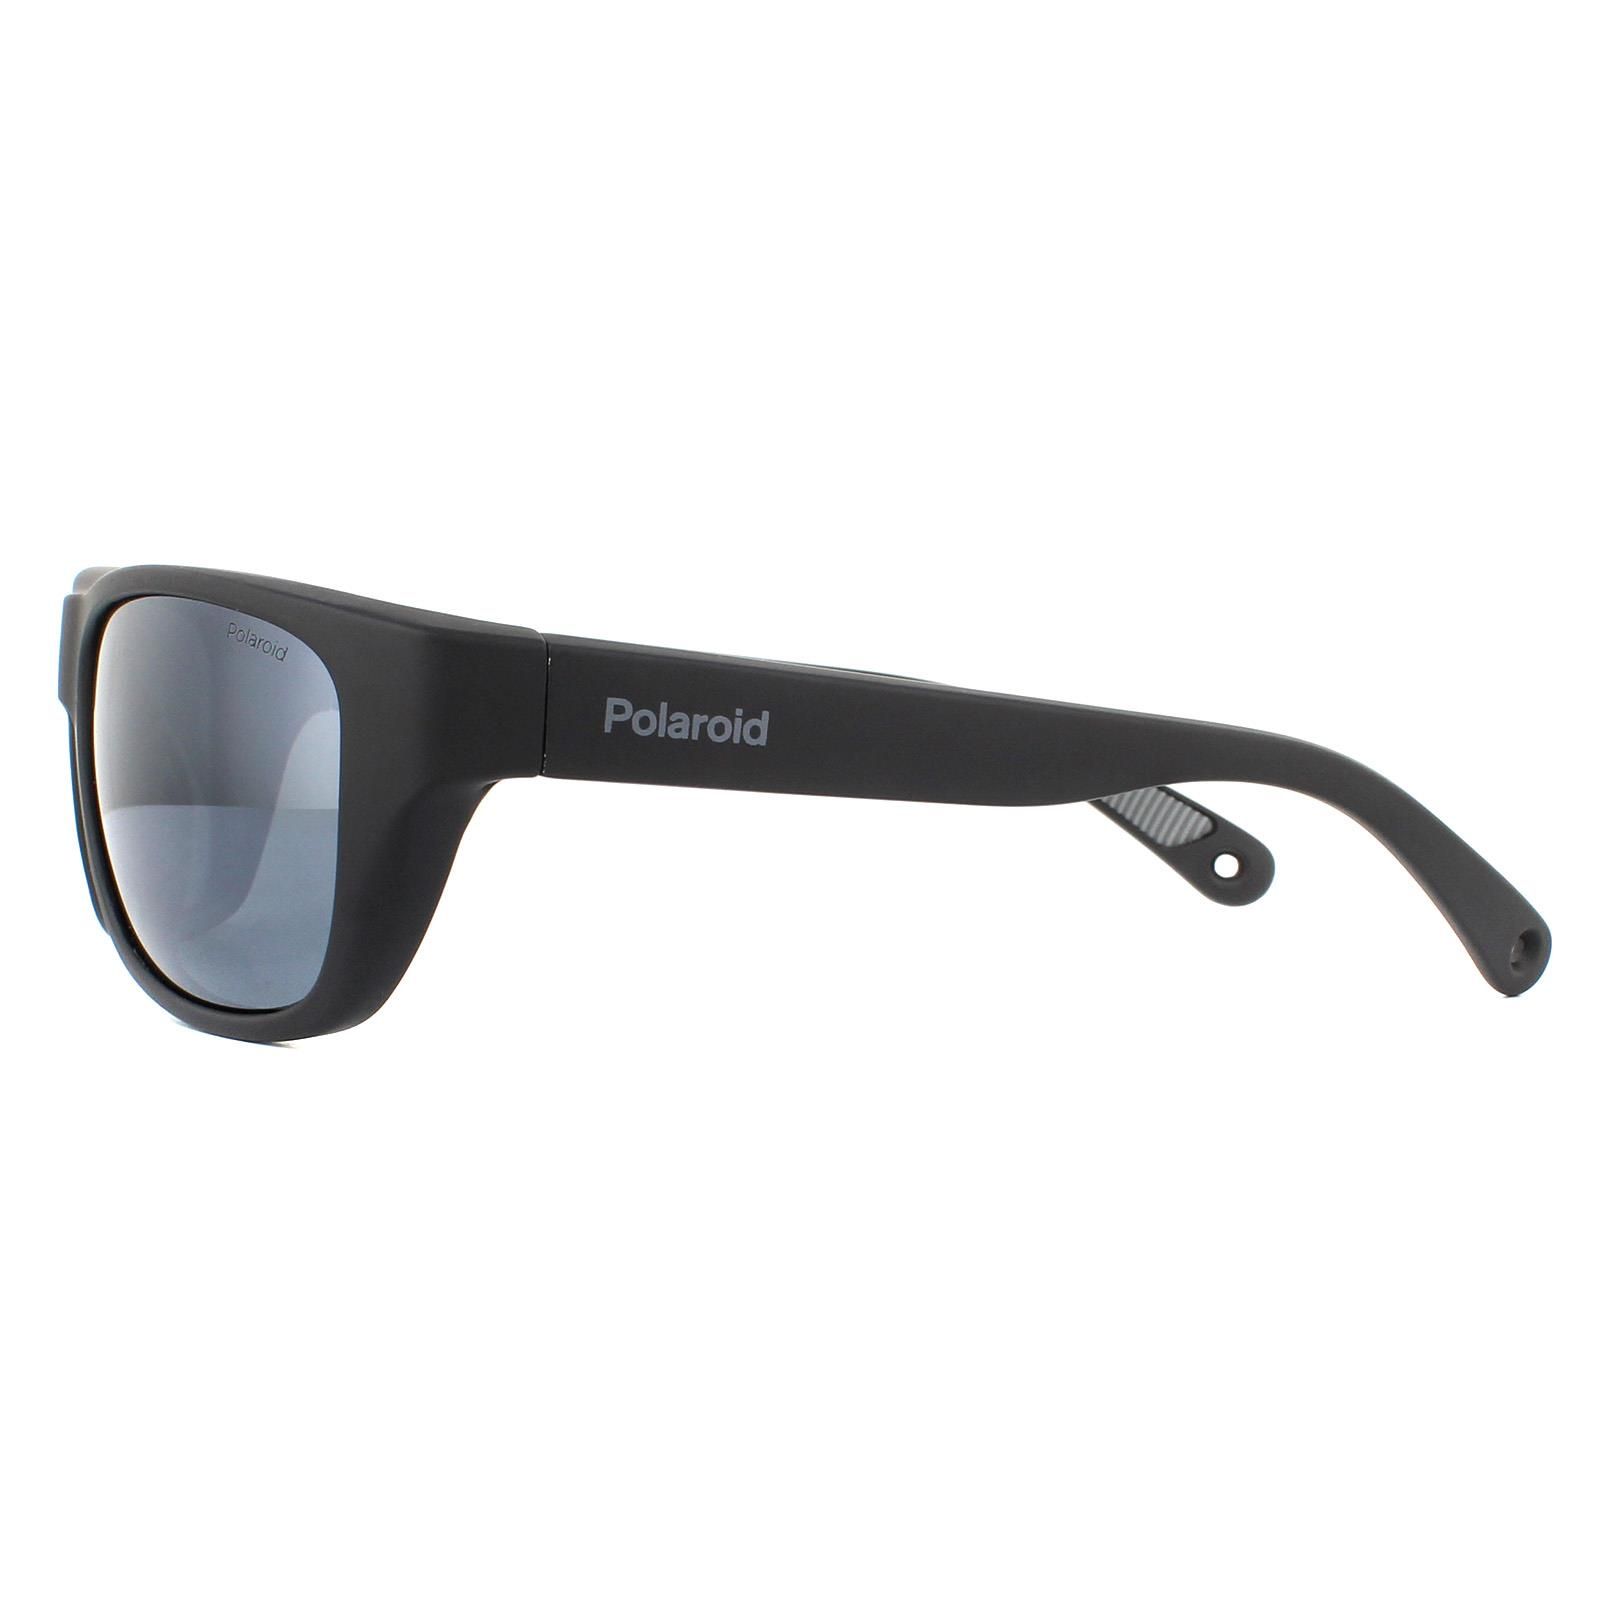 Polaroid Sport Sunglasses PLD 7030/S BSC EX Black Silver Grey Silver Mirror Polarized are a sports style with a strap to hold the sunglasses in place. The lightweight plastic frame is comfortable for long wear and polarized lenses help to reduce glare and protect the eyes.